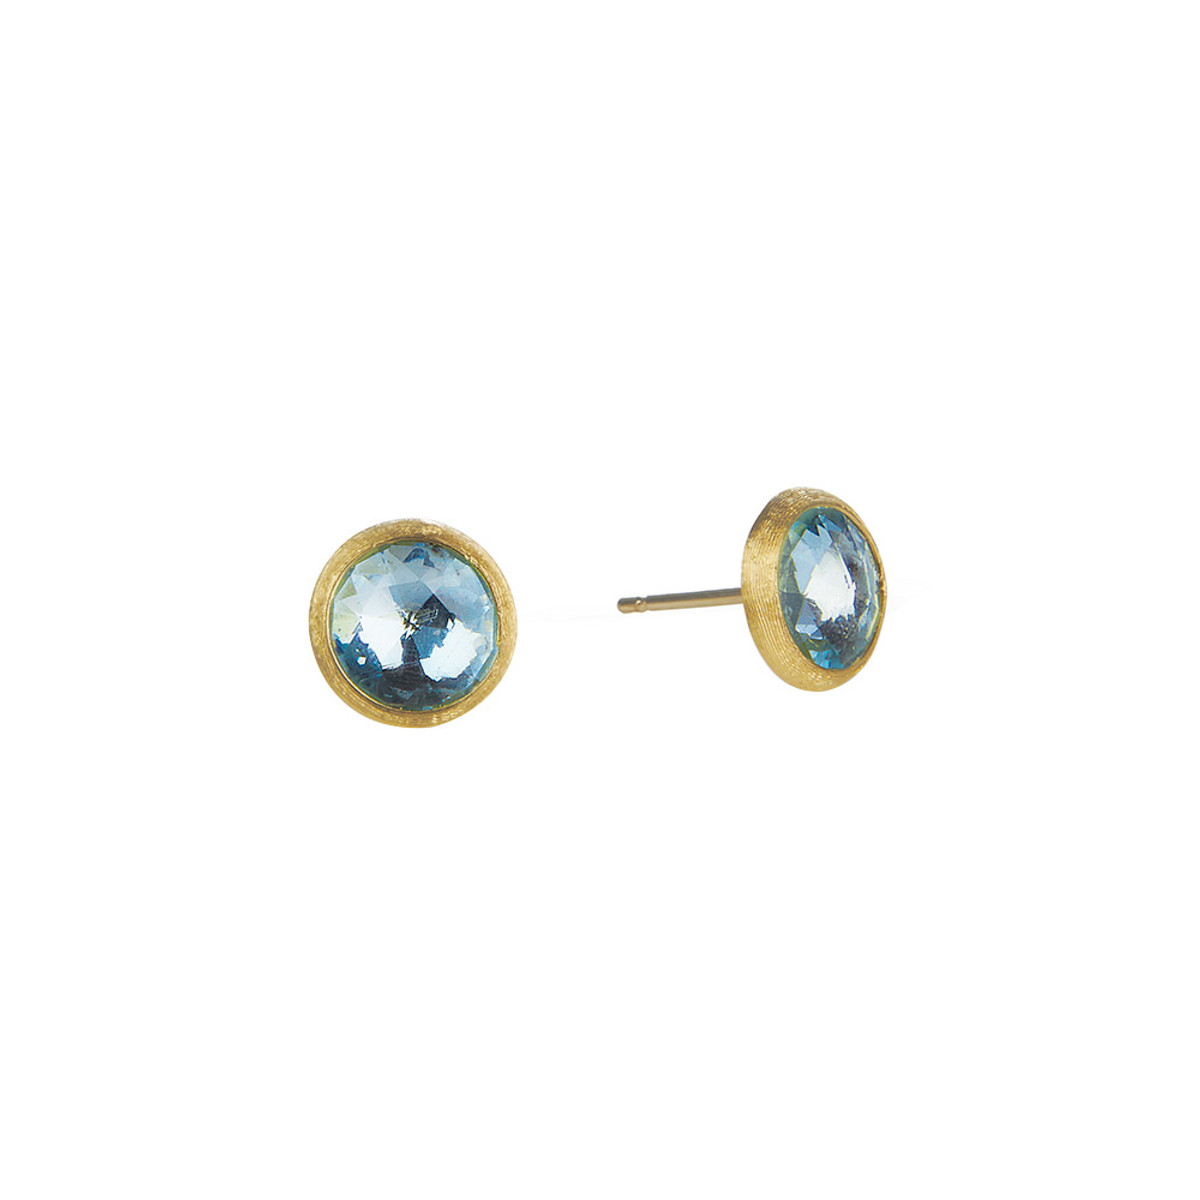 Marco Bicego Jaipur 18KT Yellow Gold & Blue Topaz Petite Stud Earrings-JBTER0215 Product Image